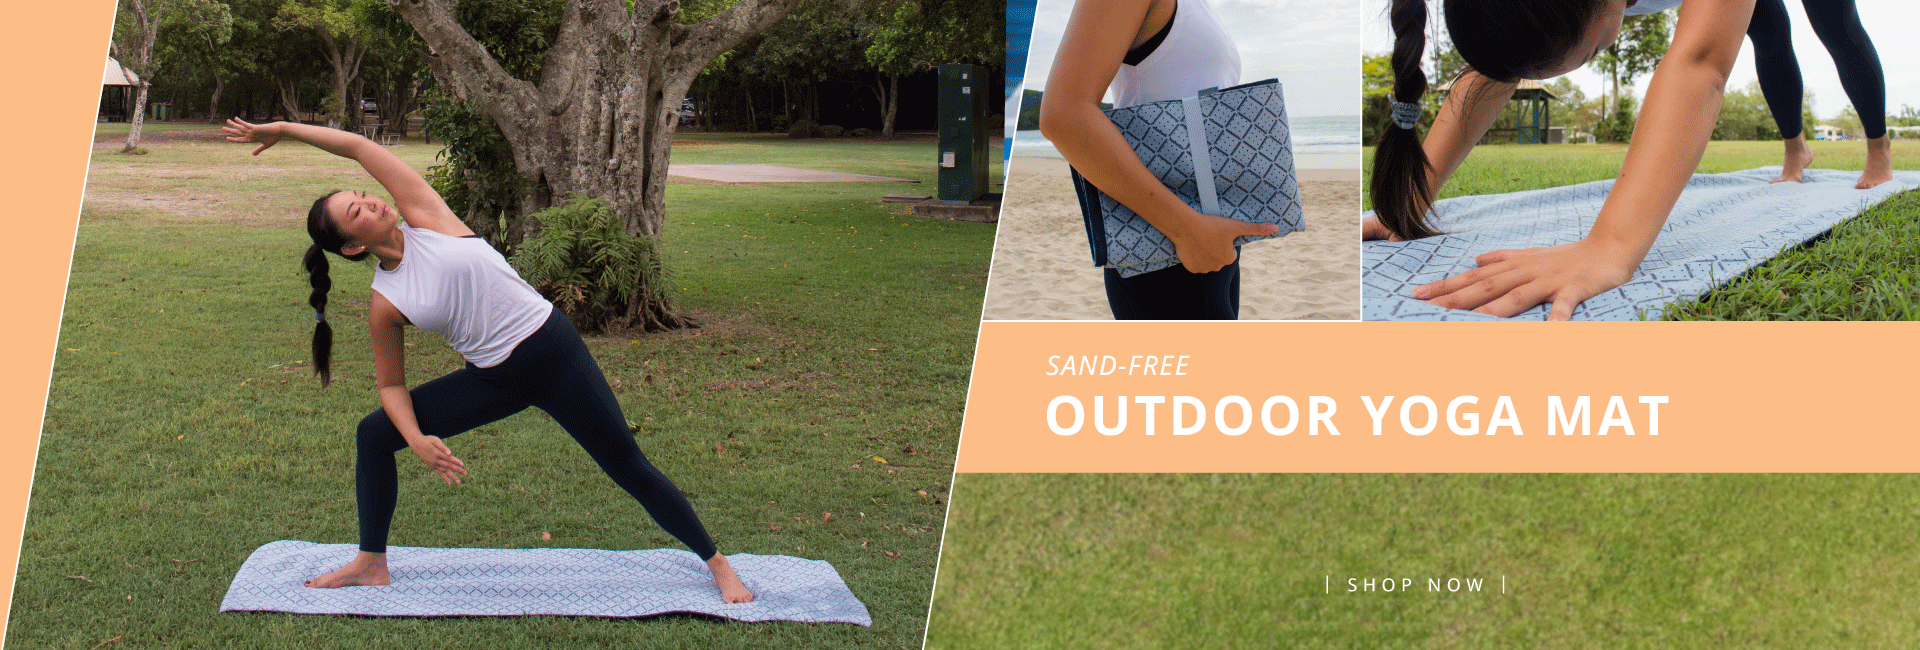 Sand-Free Camping and Beach Mats — CGEAR SAND-FREE